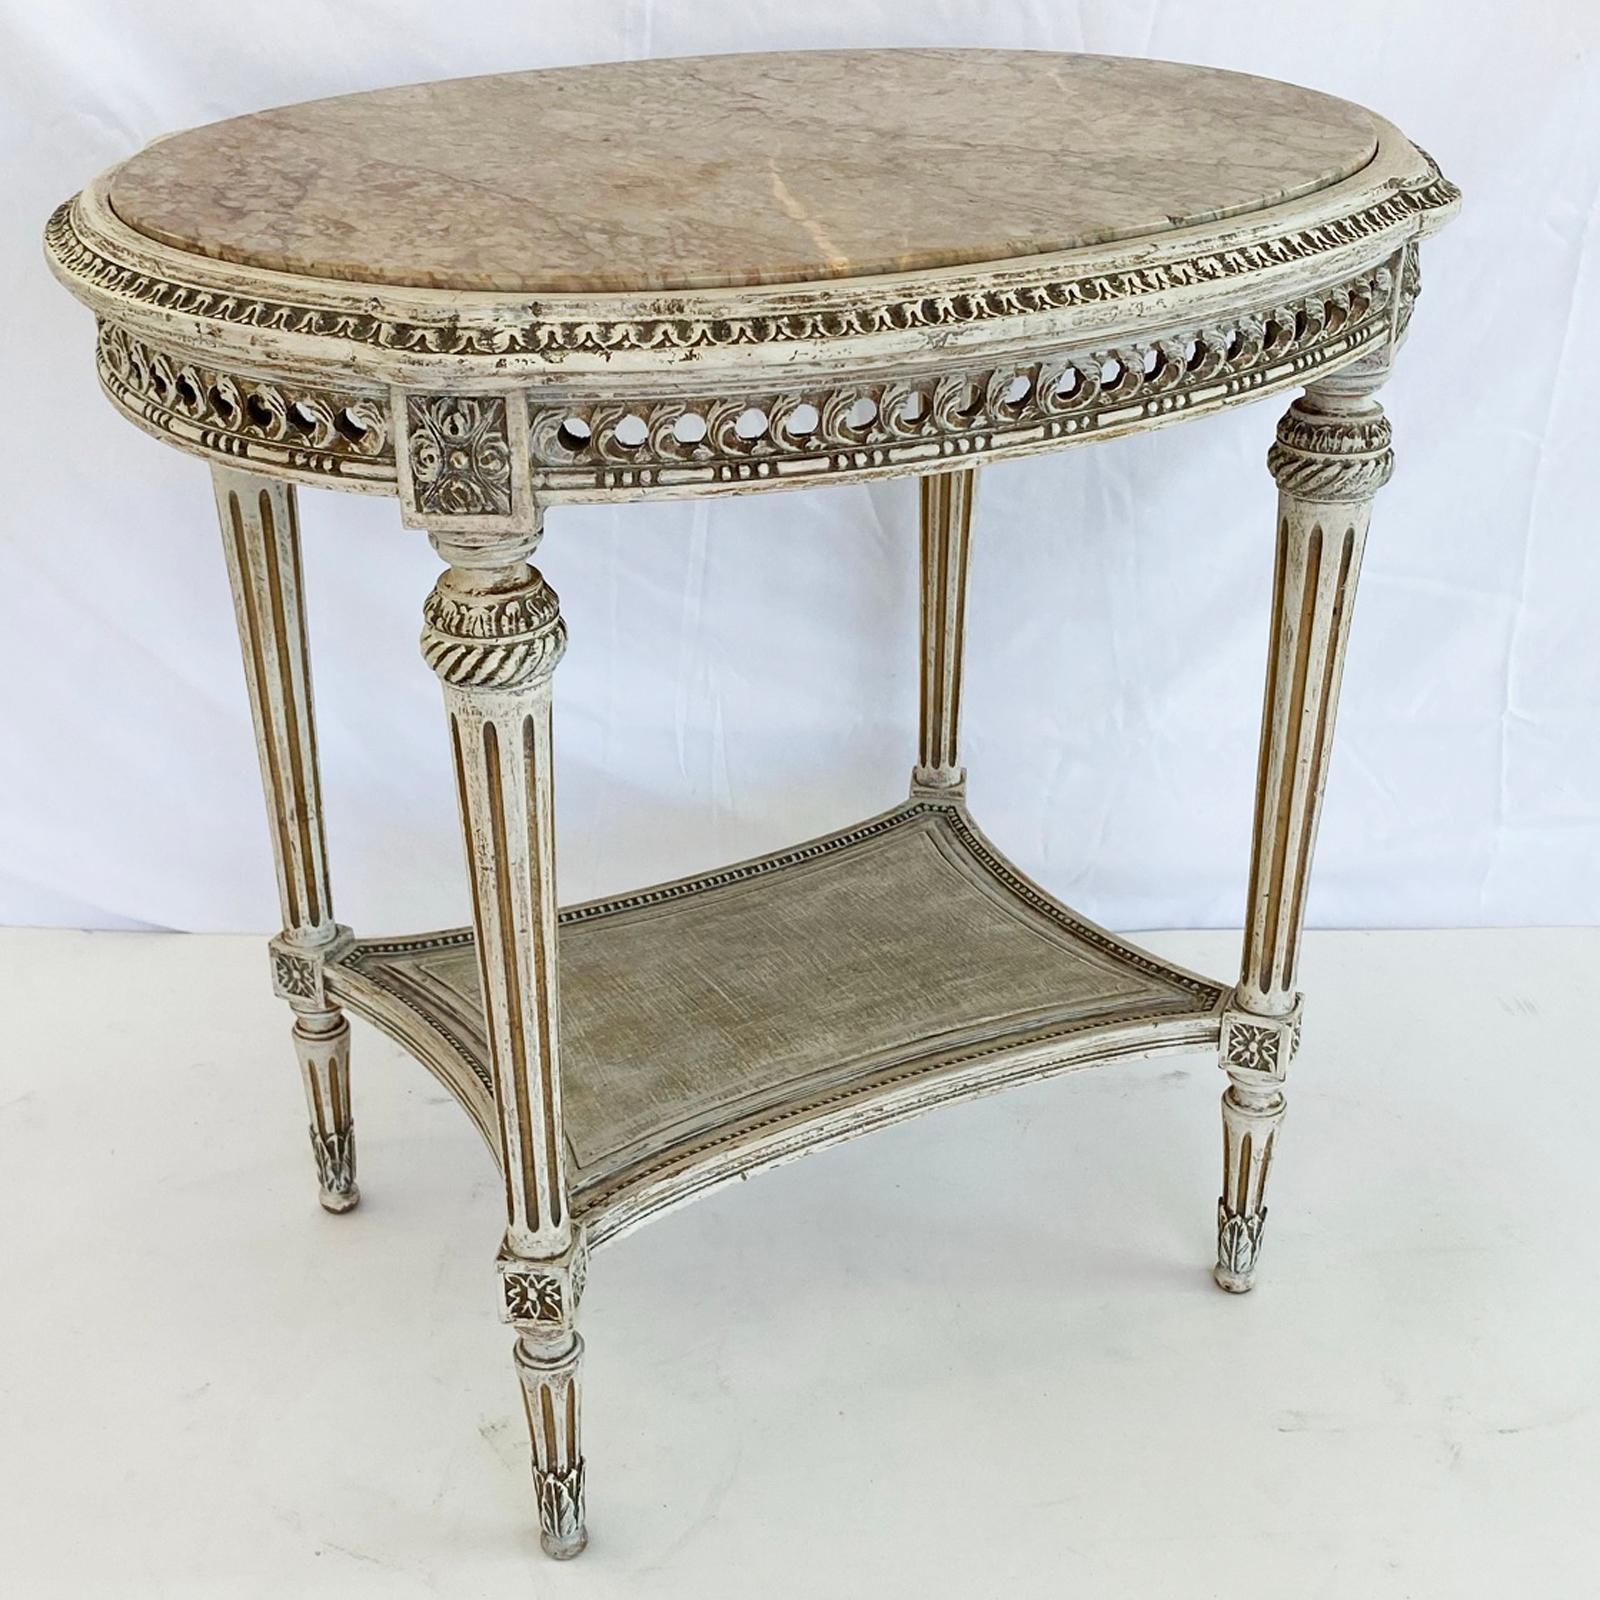 Oval occasional table, its painted finish showing natural wear, having a marble top inset on conforming table base, with gadrooned border, over pierced evolute scroll apron, raised on four, rosette-block headed, round, tapering, fluted legs, joined